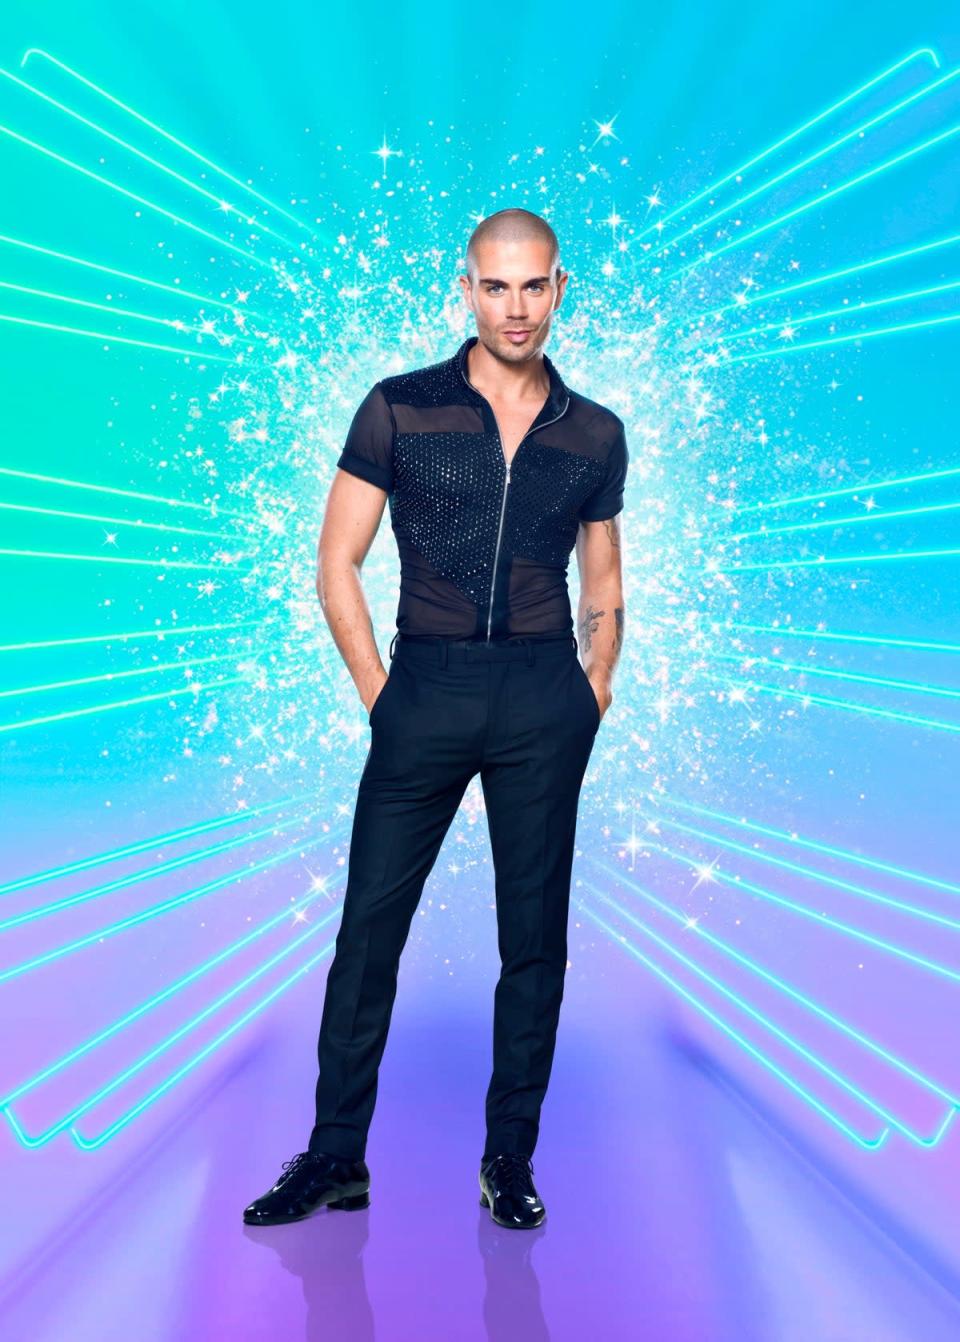 Max George appeared on BBC’s Strictly Come Dancing in 2020 and is on the 2022 tour alongside Maisie Smith. (PA)